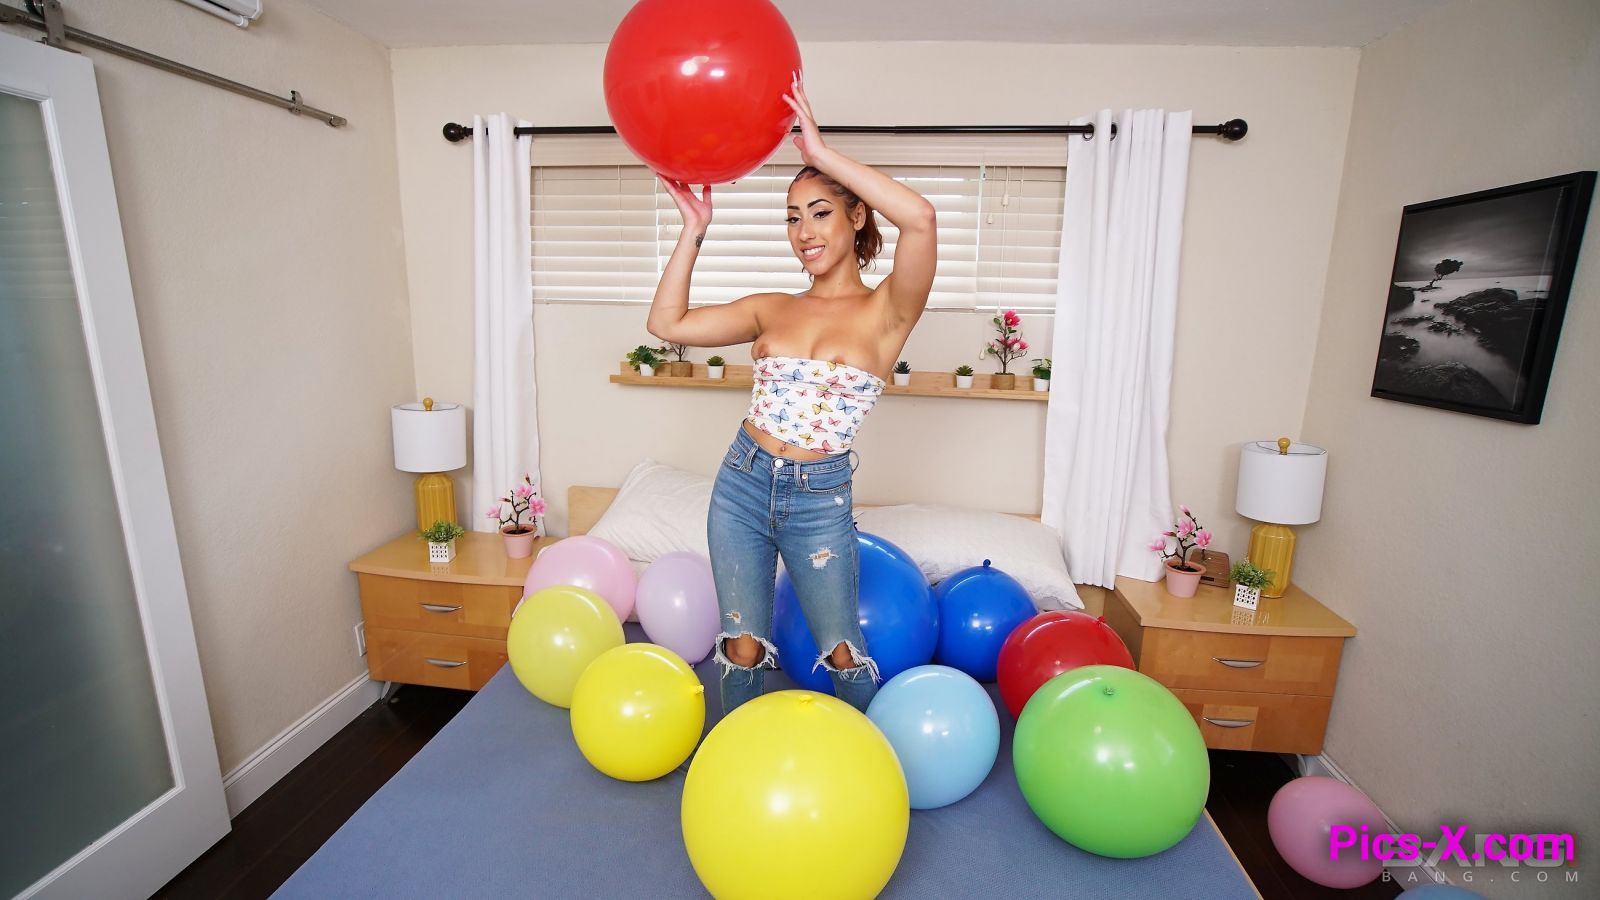 Kira Perez shows us what's poppin with some balloon tricks - Image 1